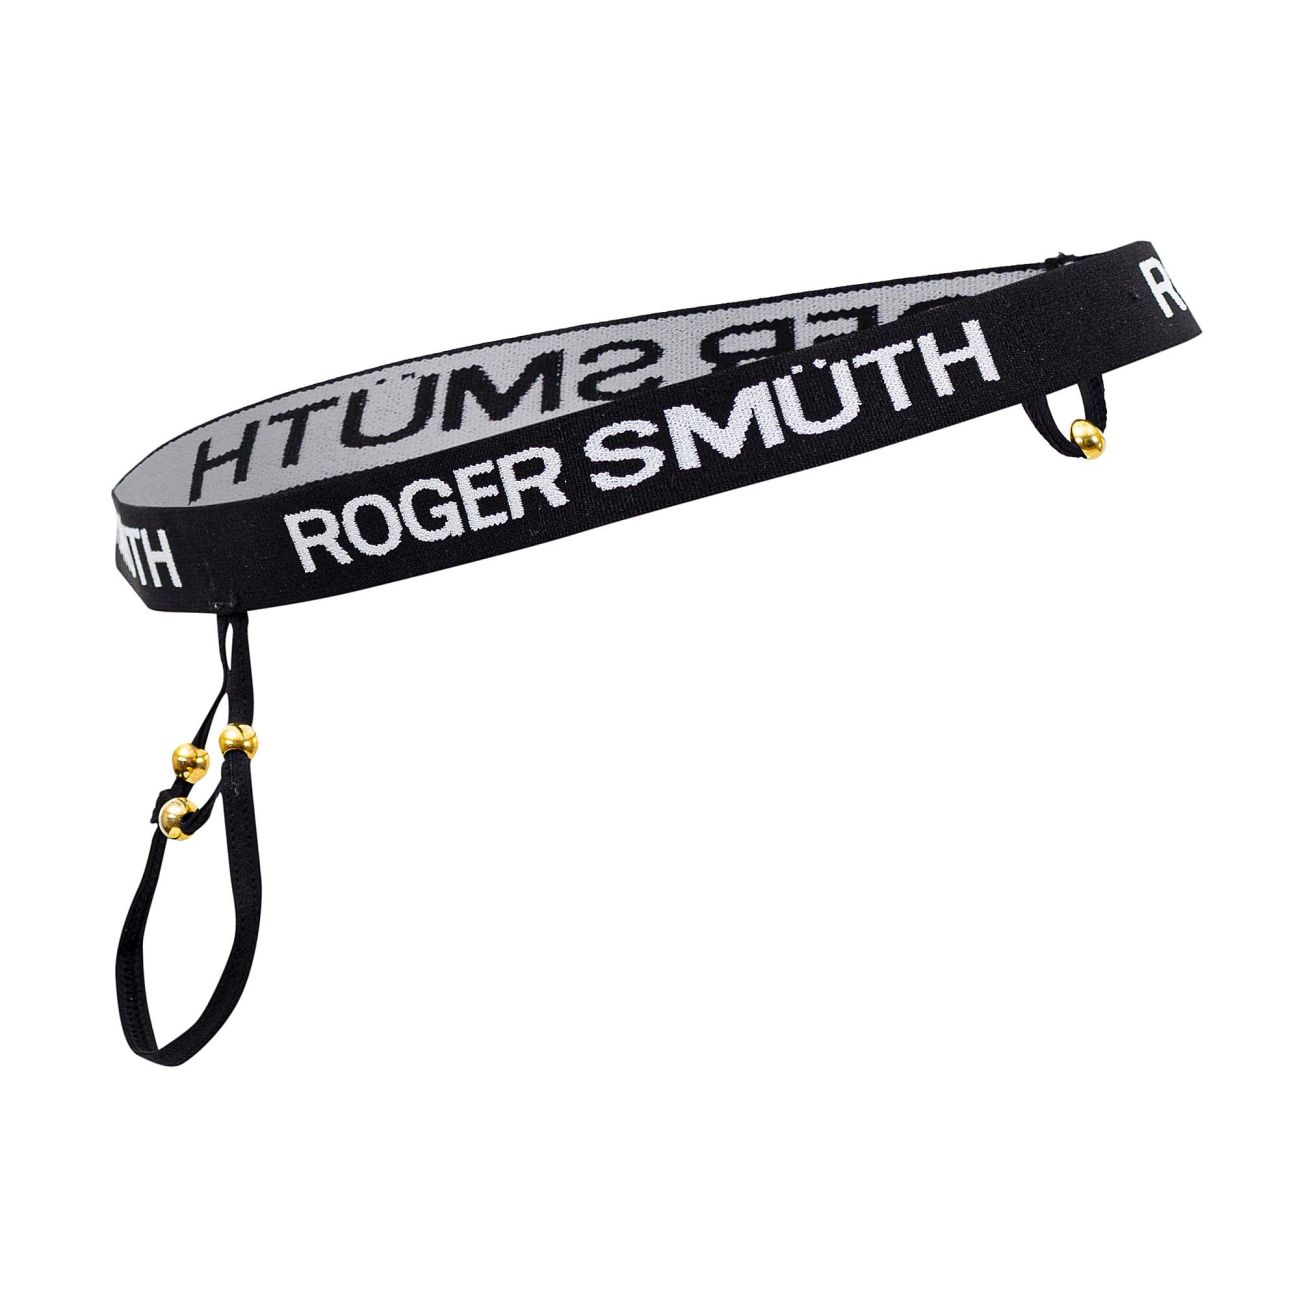 [Roger Smuth] Ball lifter Black (RS089)